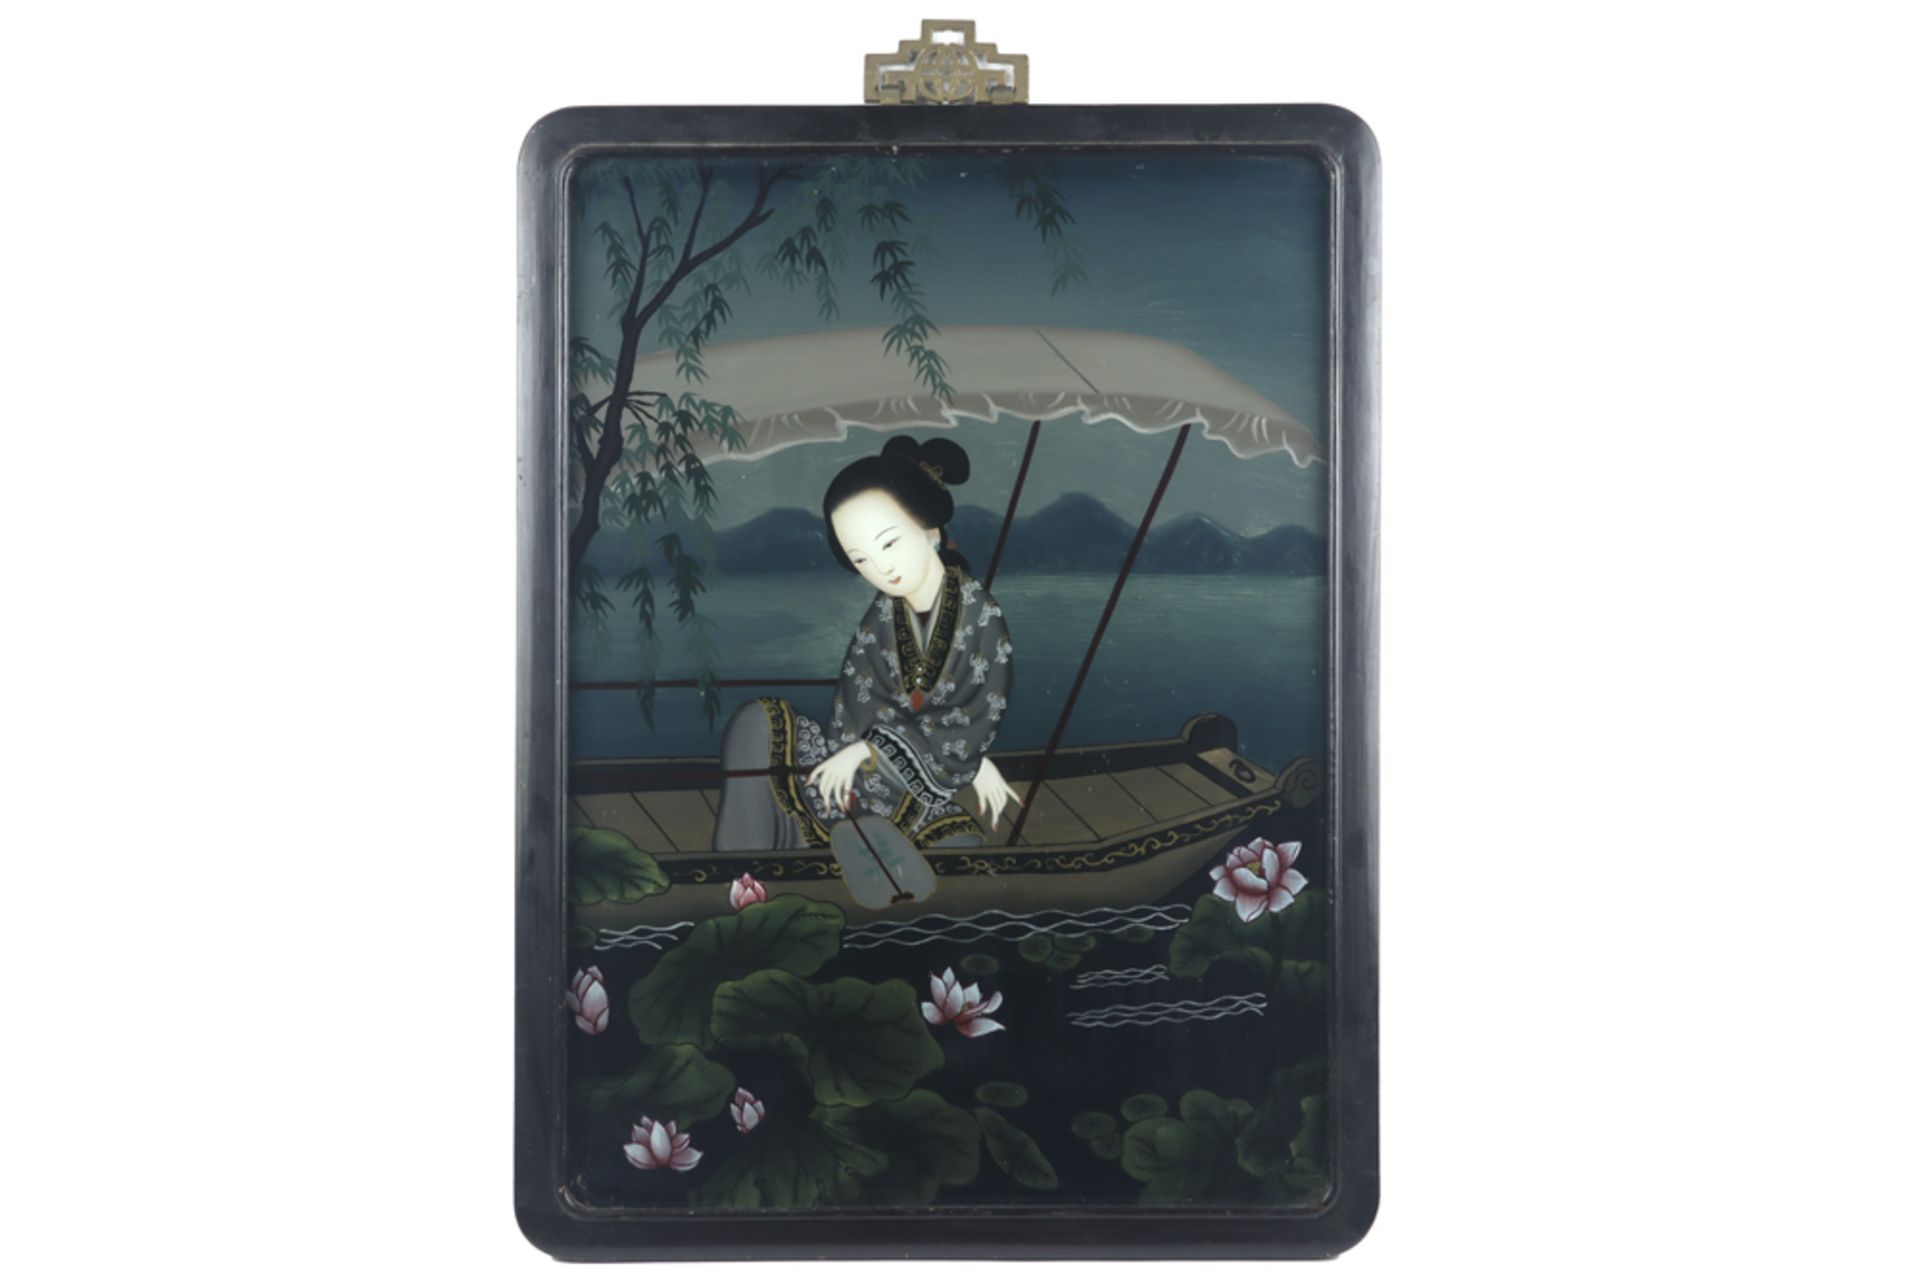 framed Chinese glass-painting || Ingekaderde Chinese achterglasschildering met dame in bootje - 53 x